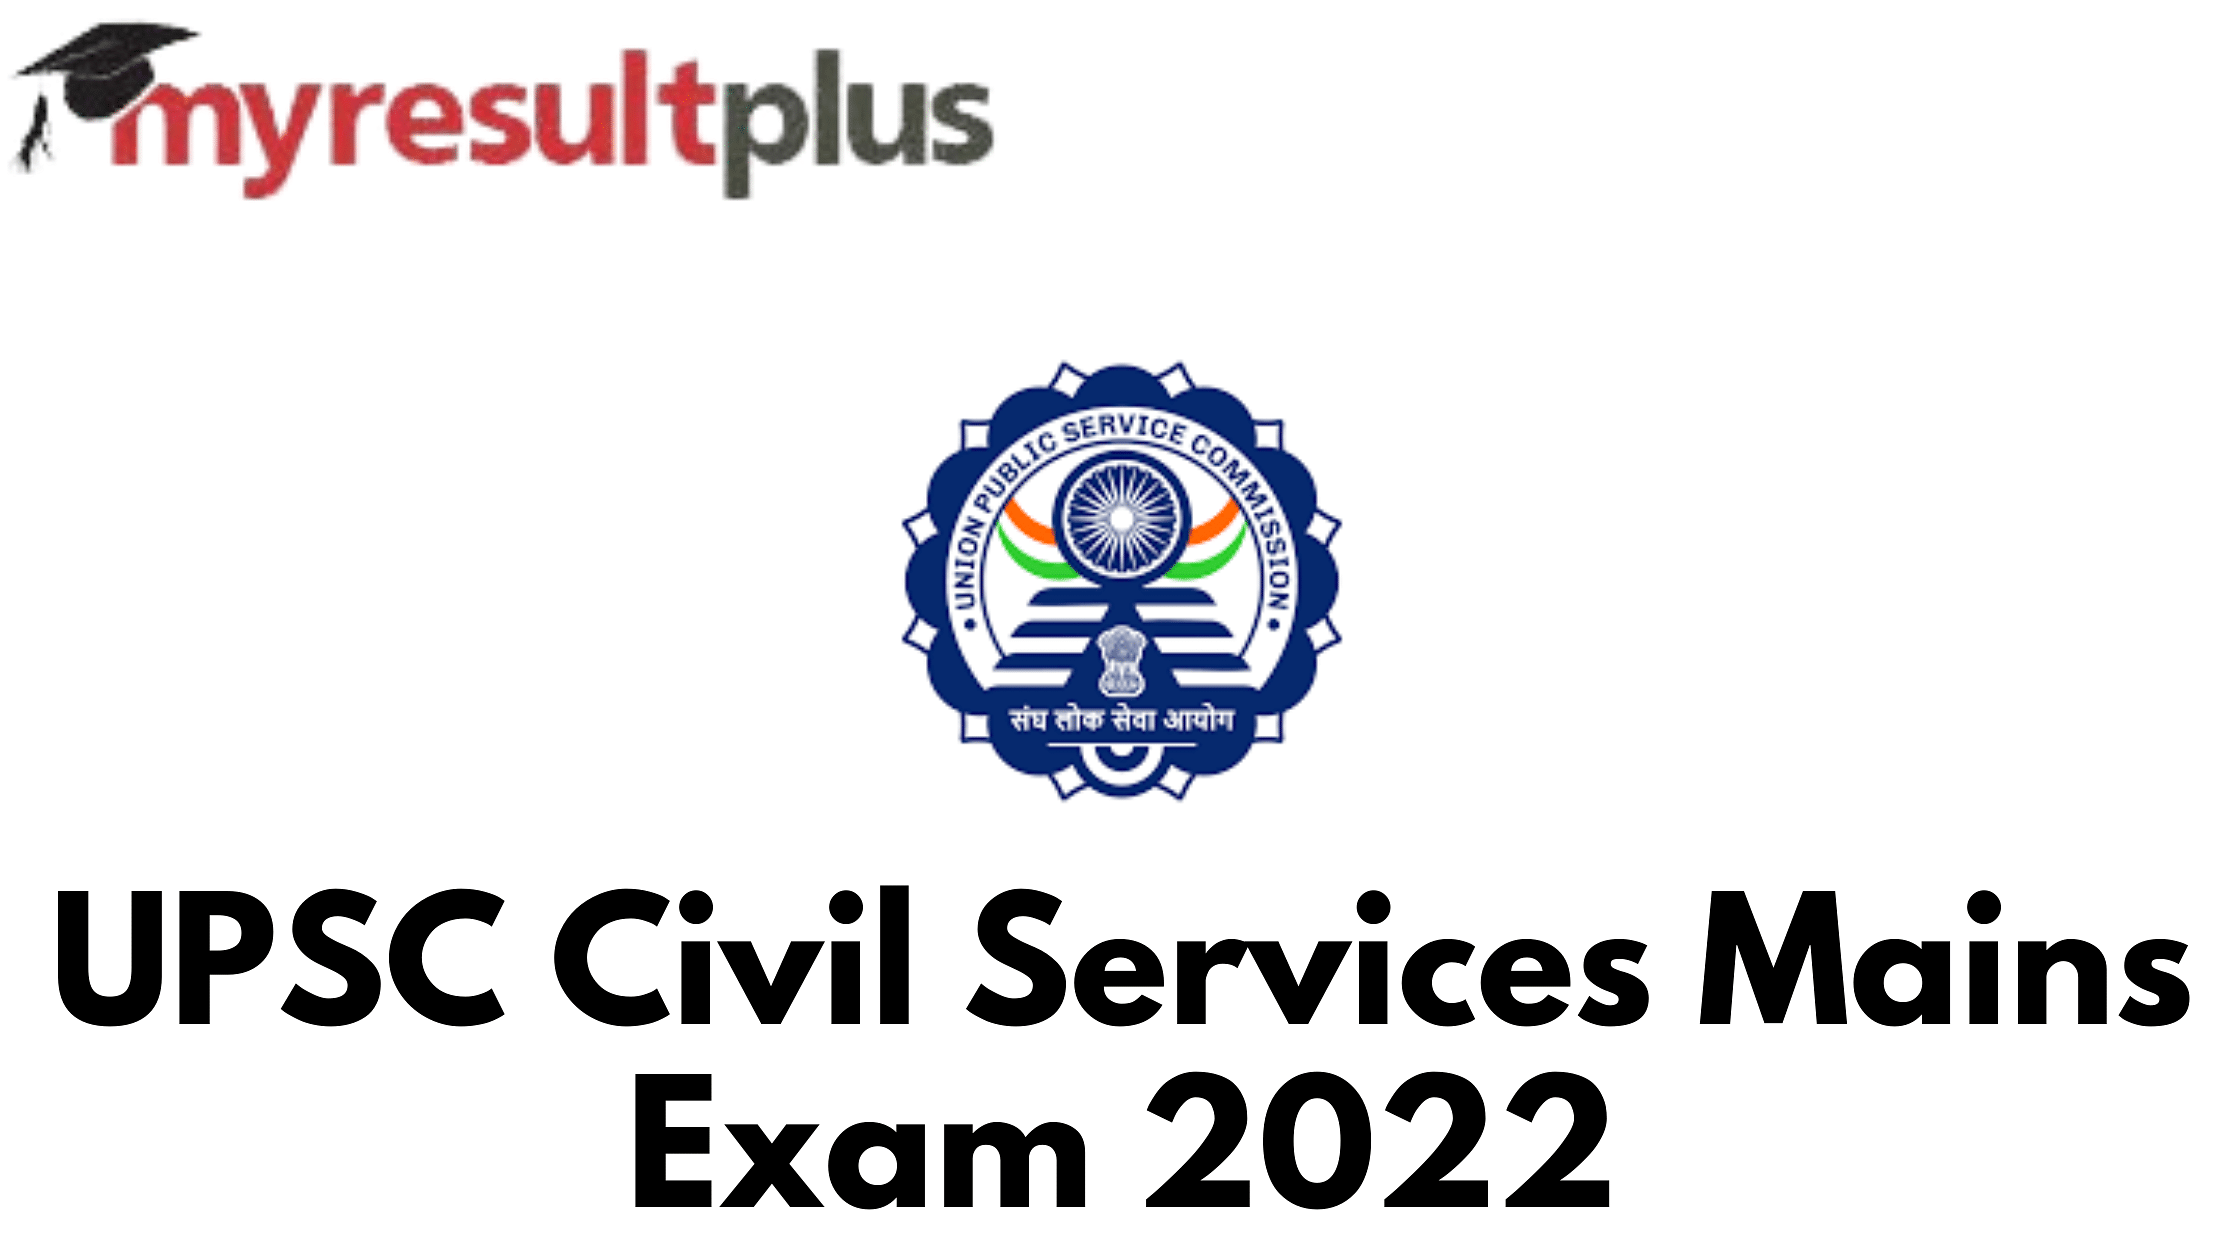 UPSC Civil Services 2022: Mains Exam Schedule Out, Check Important Dates Here